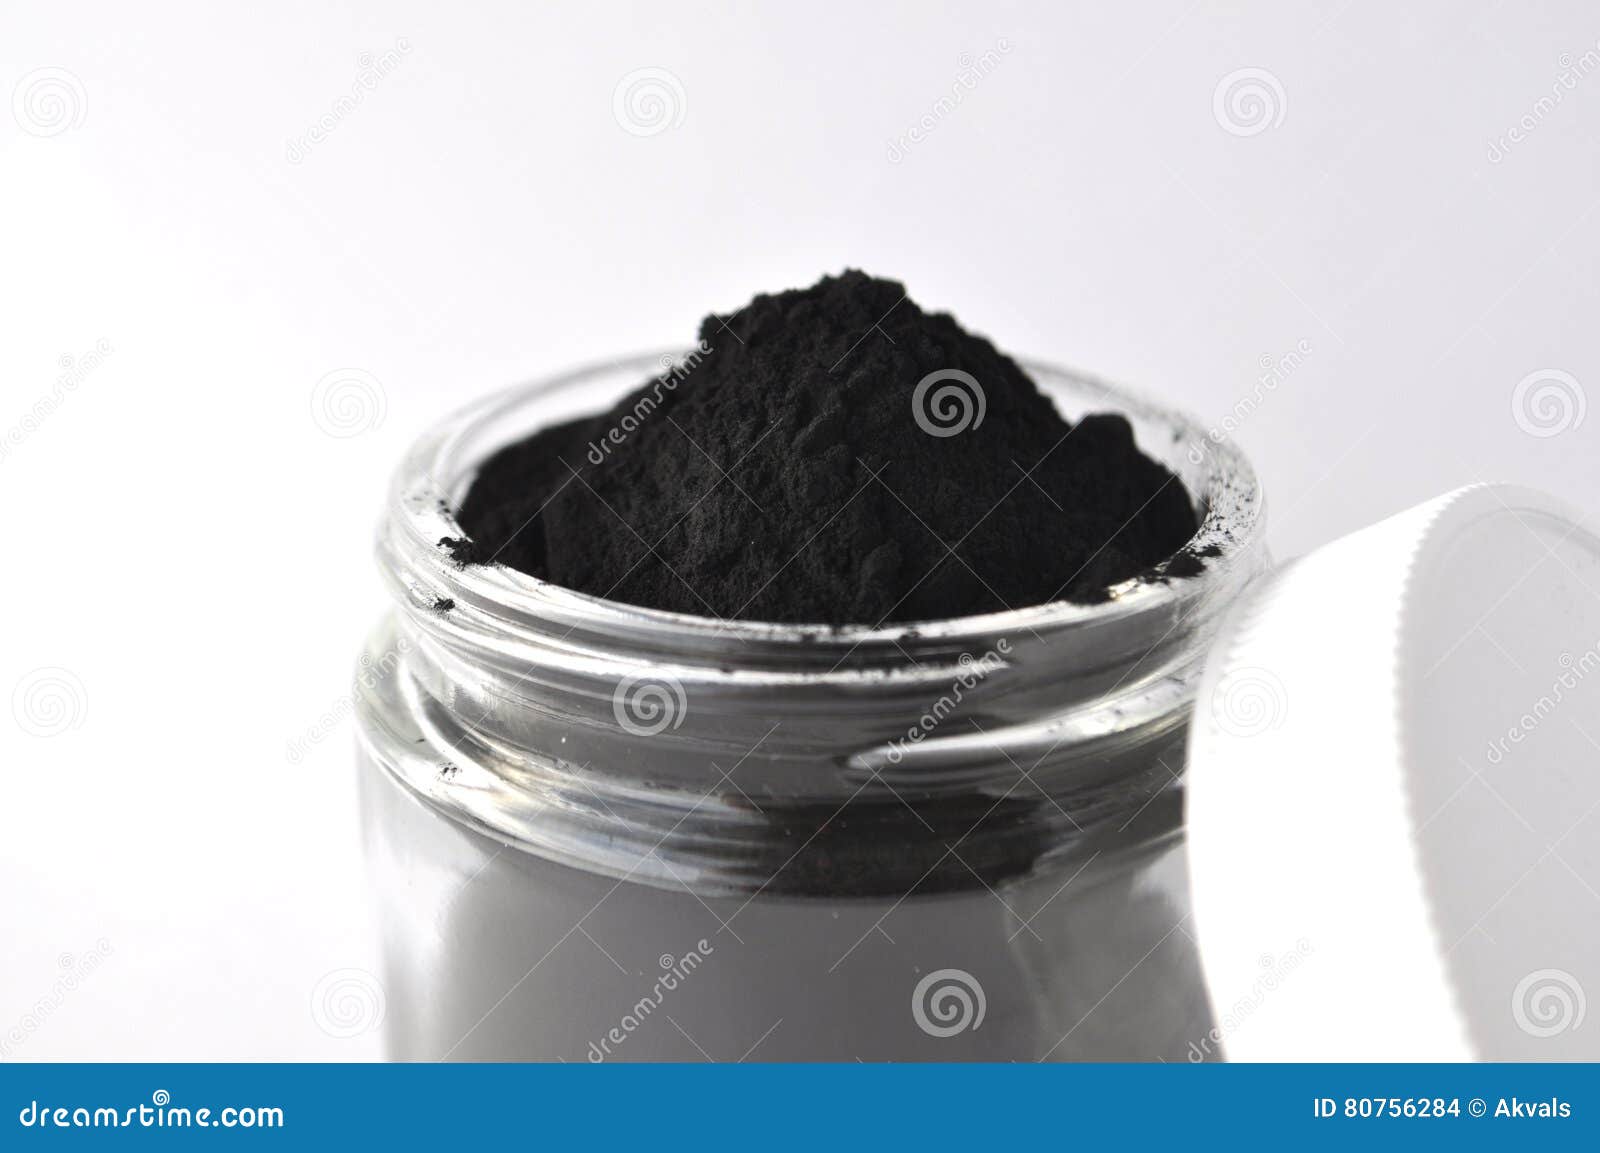 Download 510 Activated Charcoal Mask Photos Free Royalty Free Stock Photos From Dreamstime Yellowimages Mockups